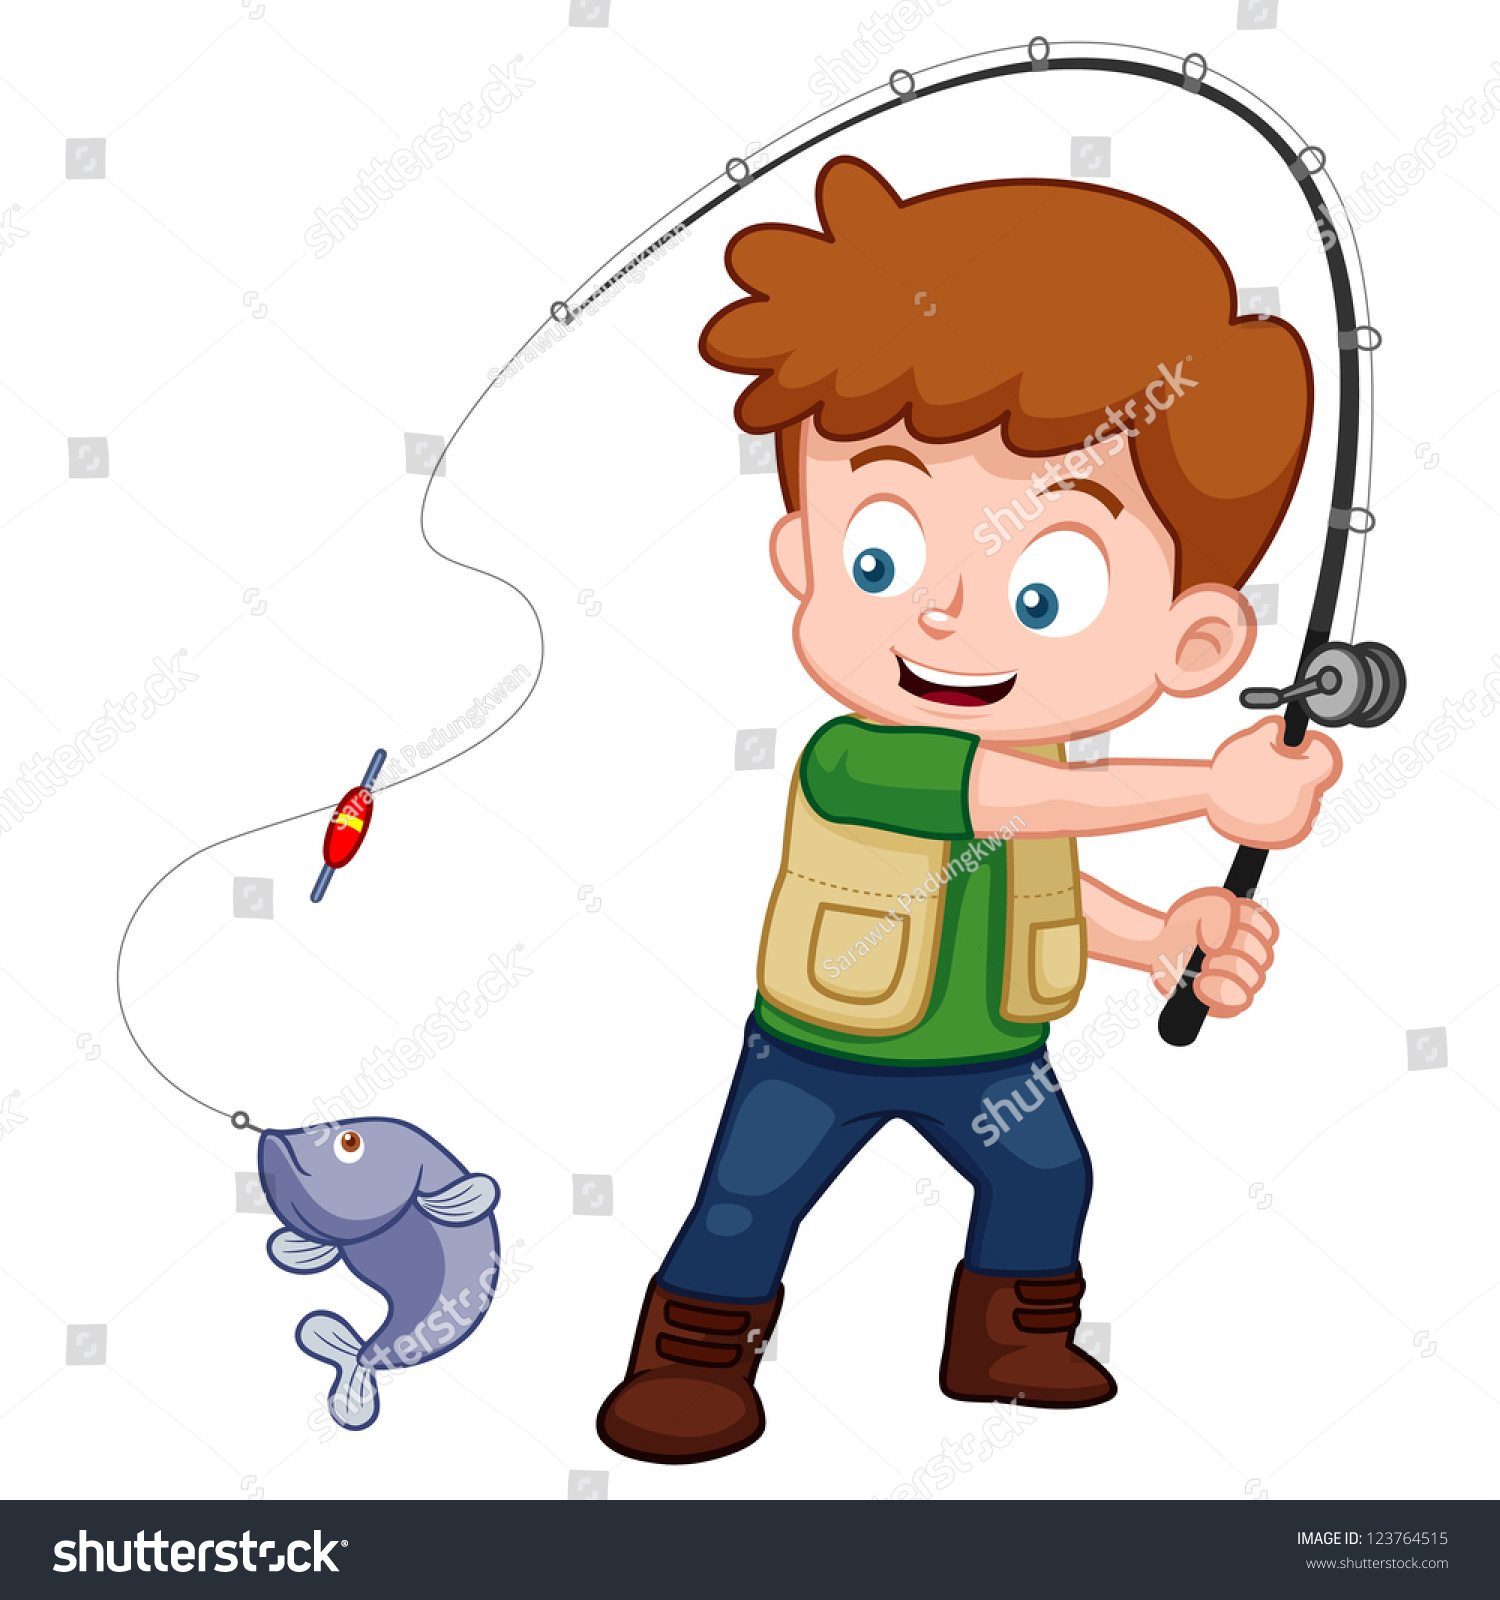 clipart catching a fish - photo #47